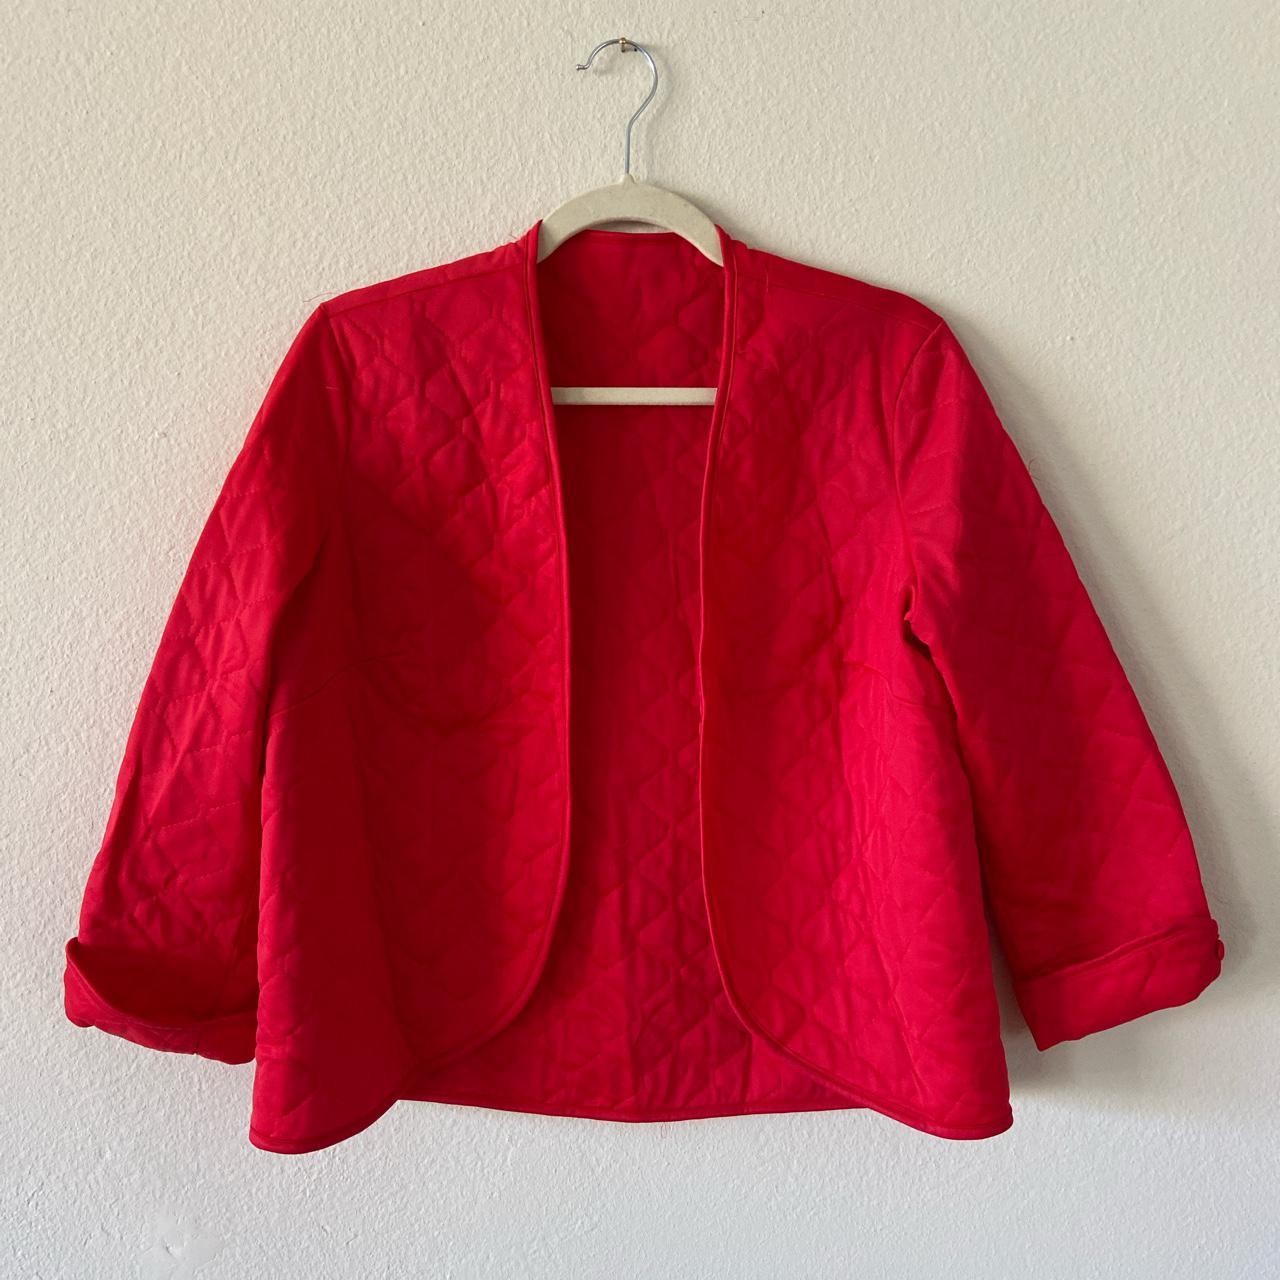 Product Image 1 - Vintage quilted jacket liner. Bright